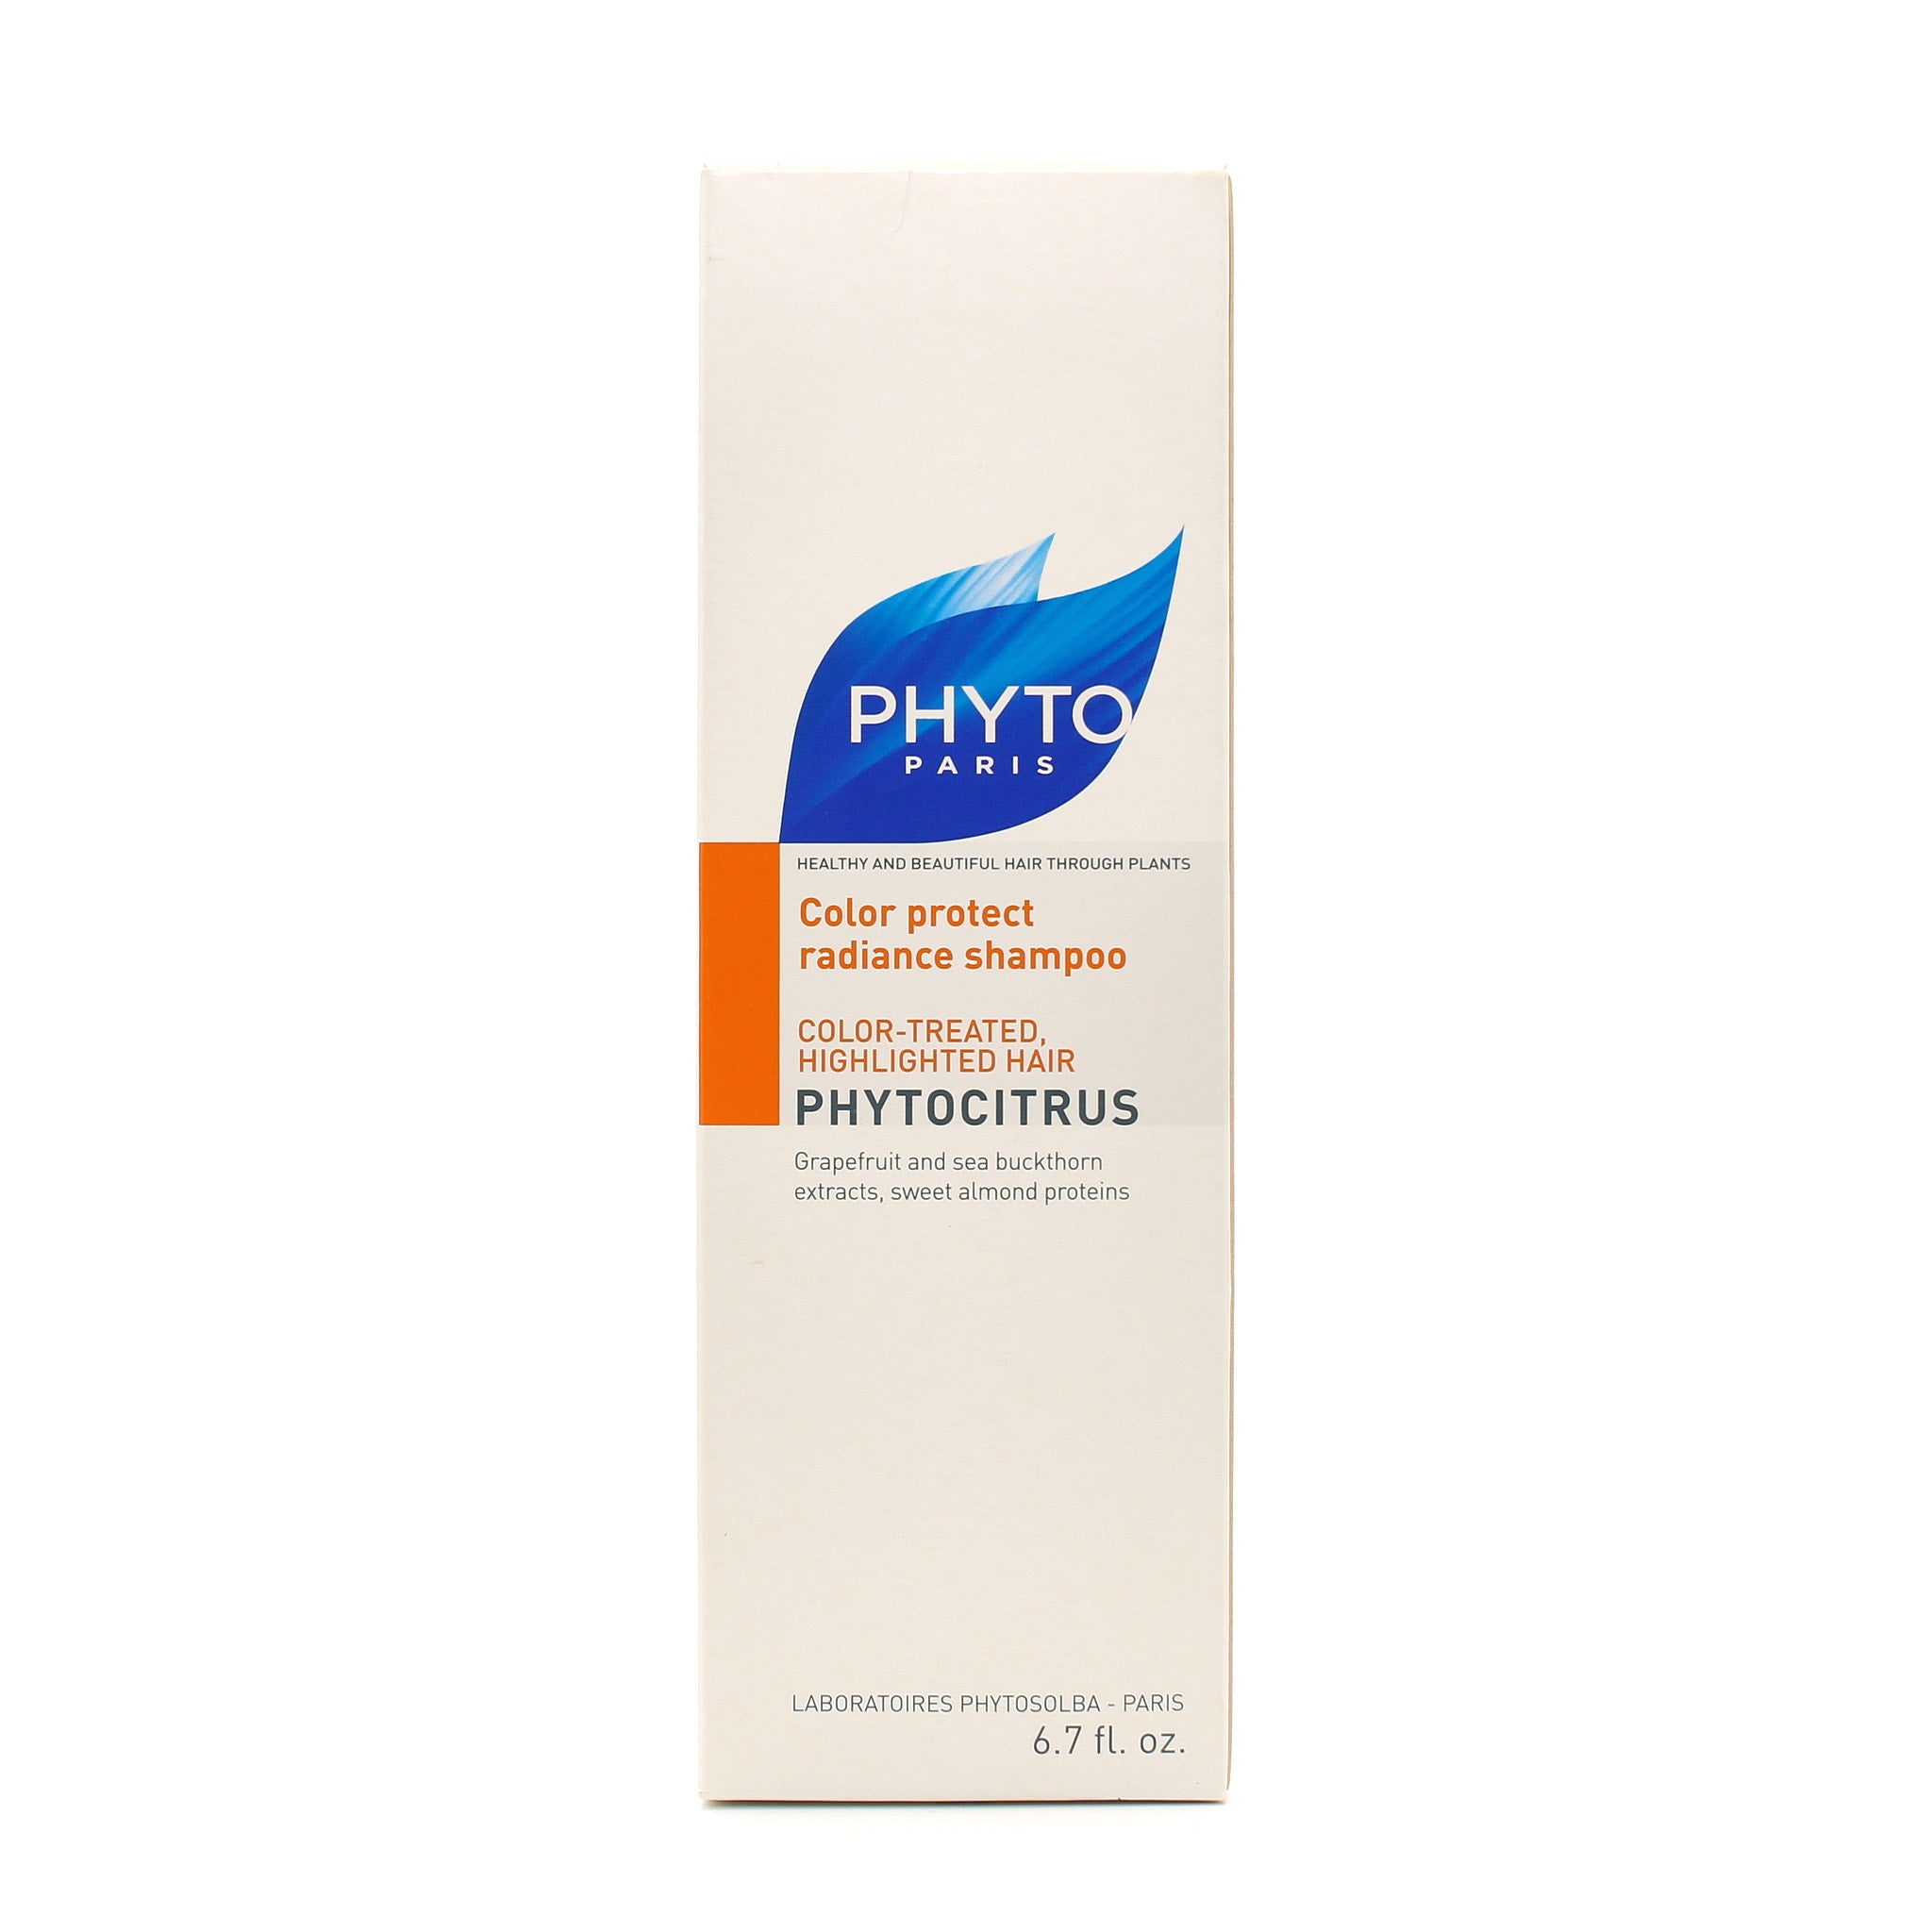 PHYTO Paris Phytocitrus Color Protect Radiance Shampoo Color Treated Highlighted Hair 6.7 oz